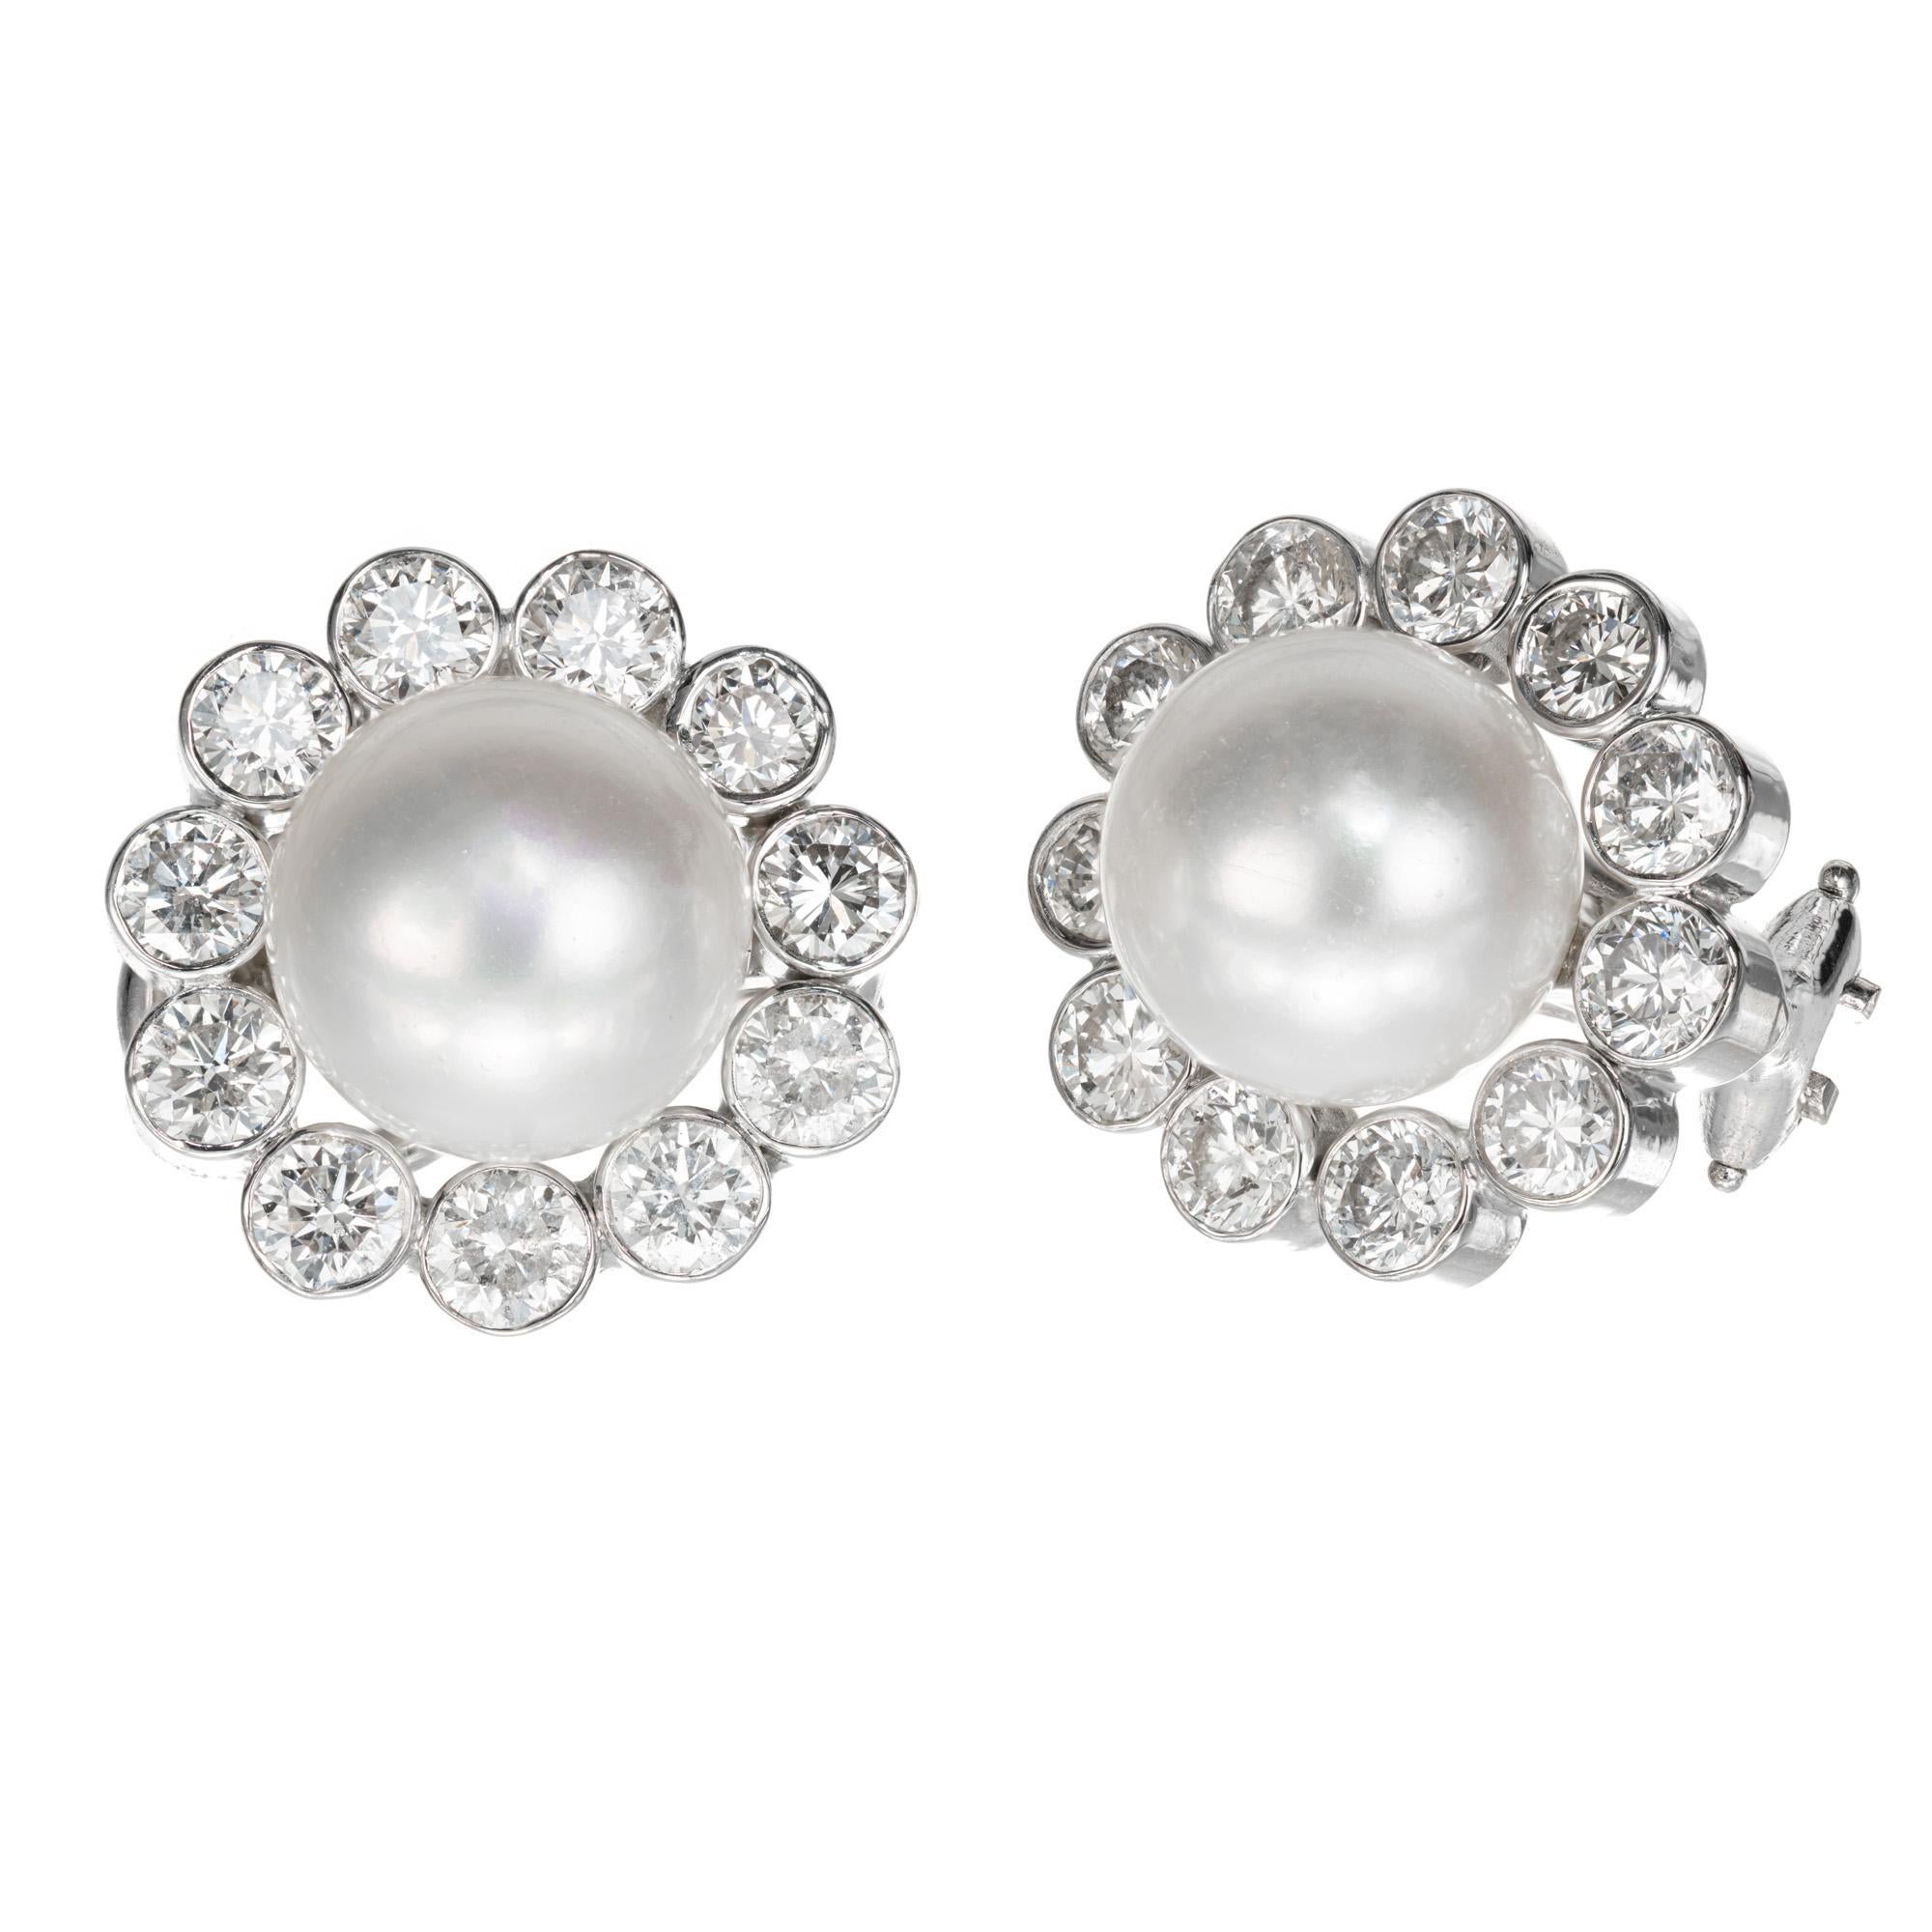 Pearl and diamond clip post earrings. 2 9.5mm Japanese cultured pearls, each with a halo of full ideal cut bezel set diamonds in 18k white gold button style settings. 

2 9.5 top gem Japanese cultured pearls with fine white high lustre. Pink